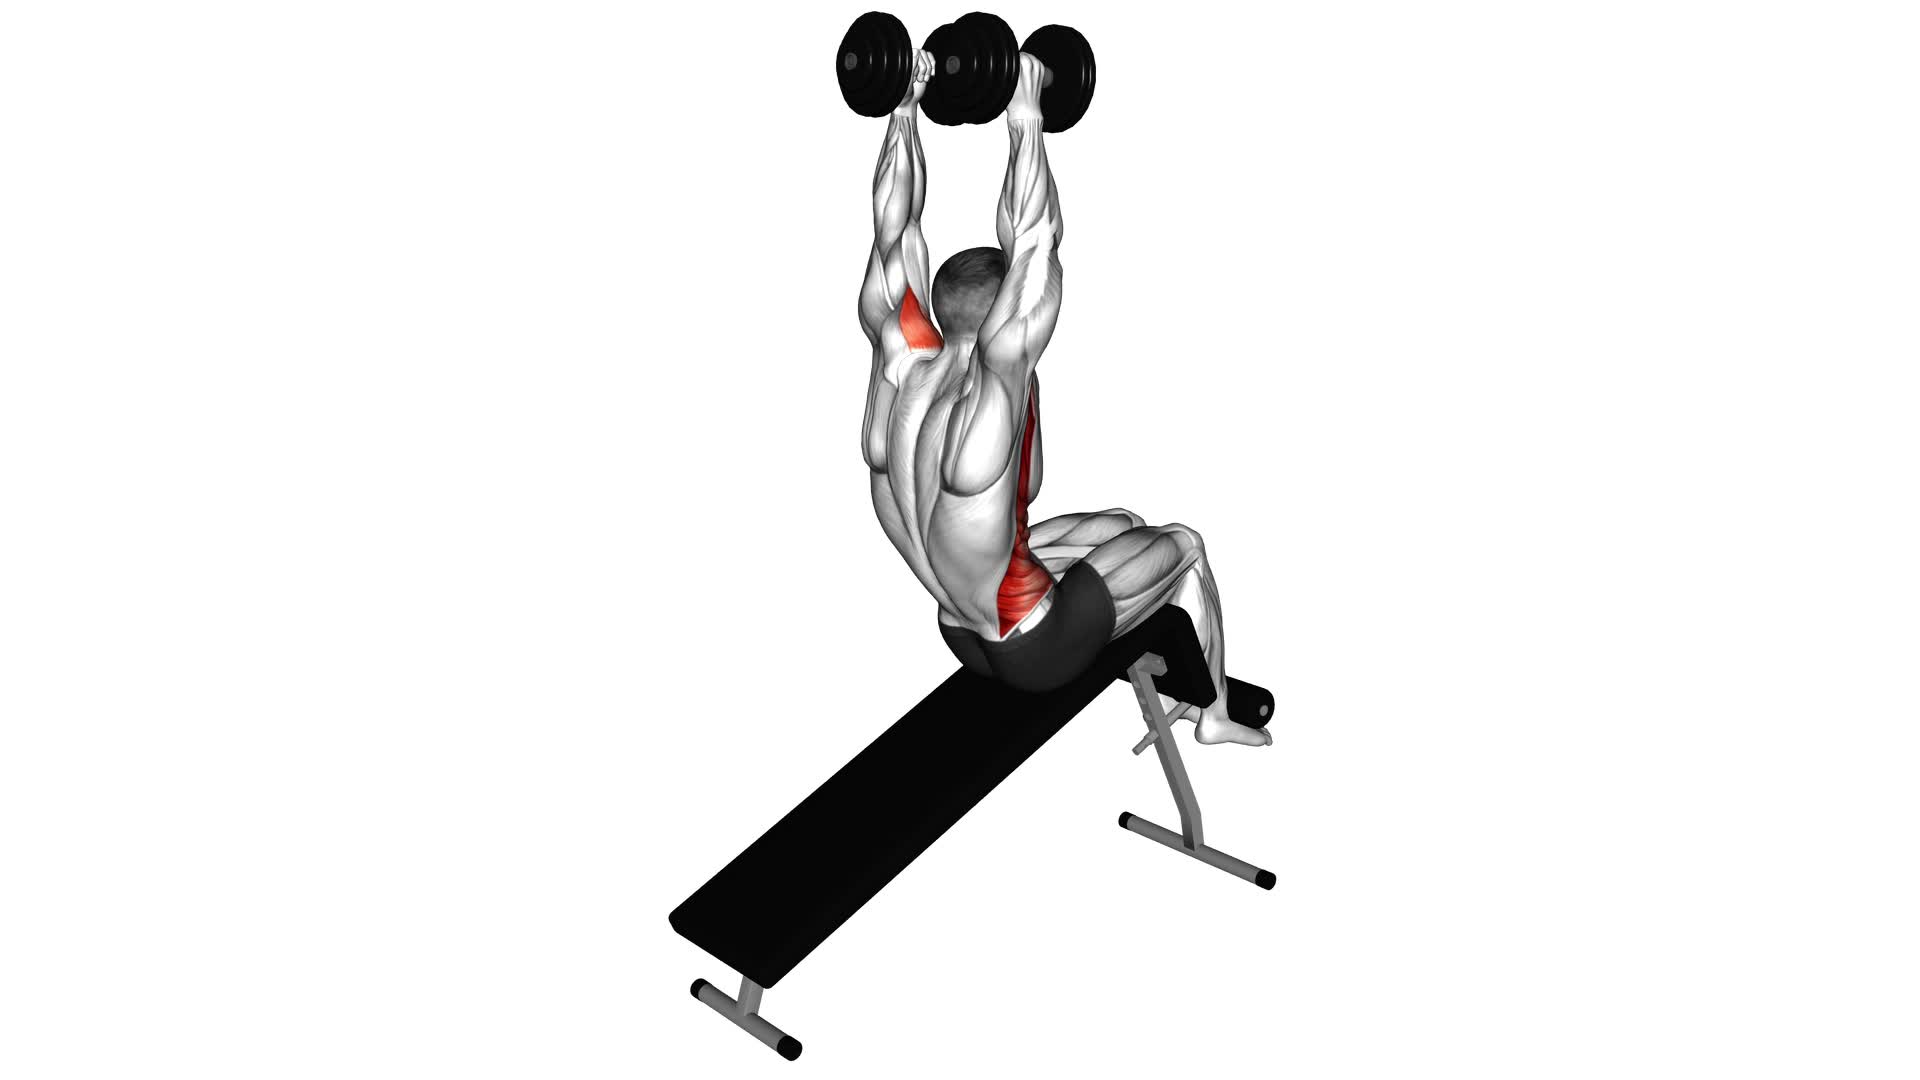 Dumbbell Decline Overhead Sit-up - Video Exercise Guide & Tips